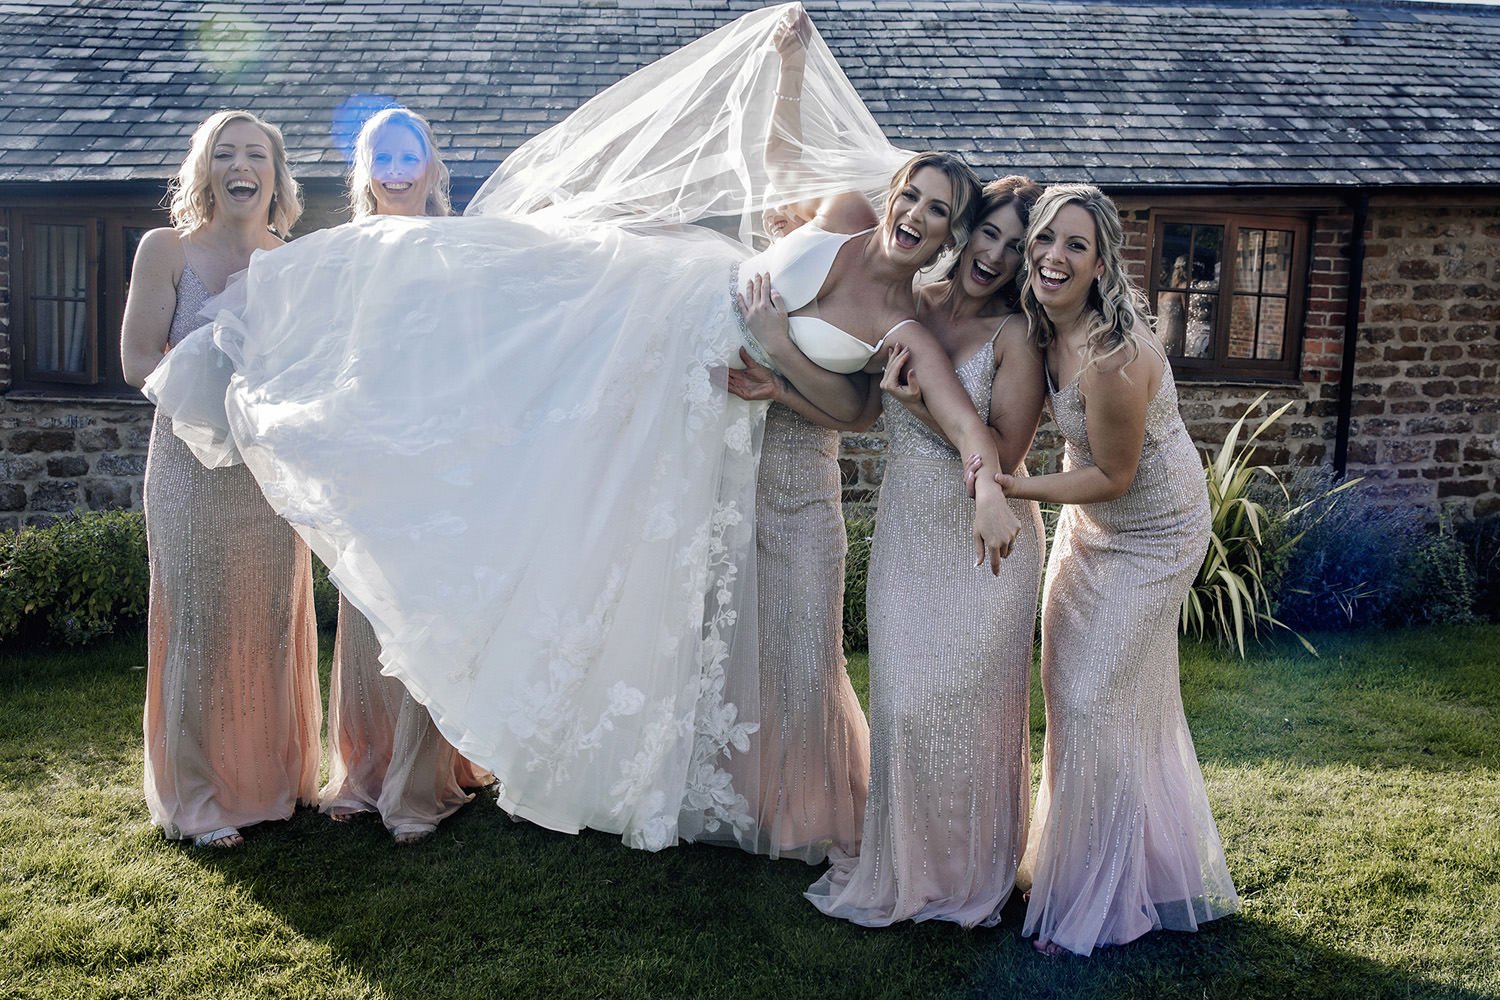 Bride picked up by bridesmaids